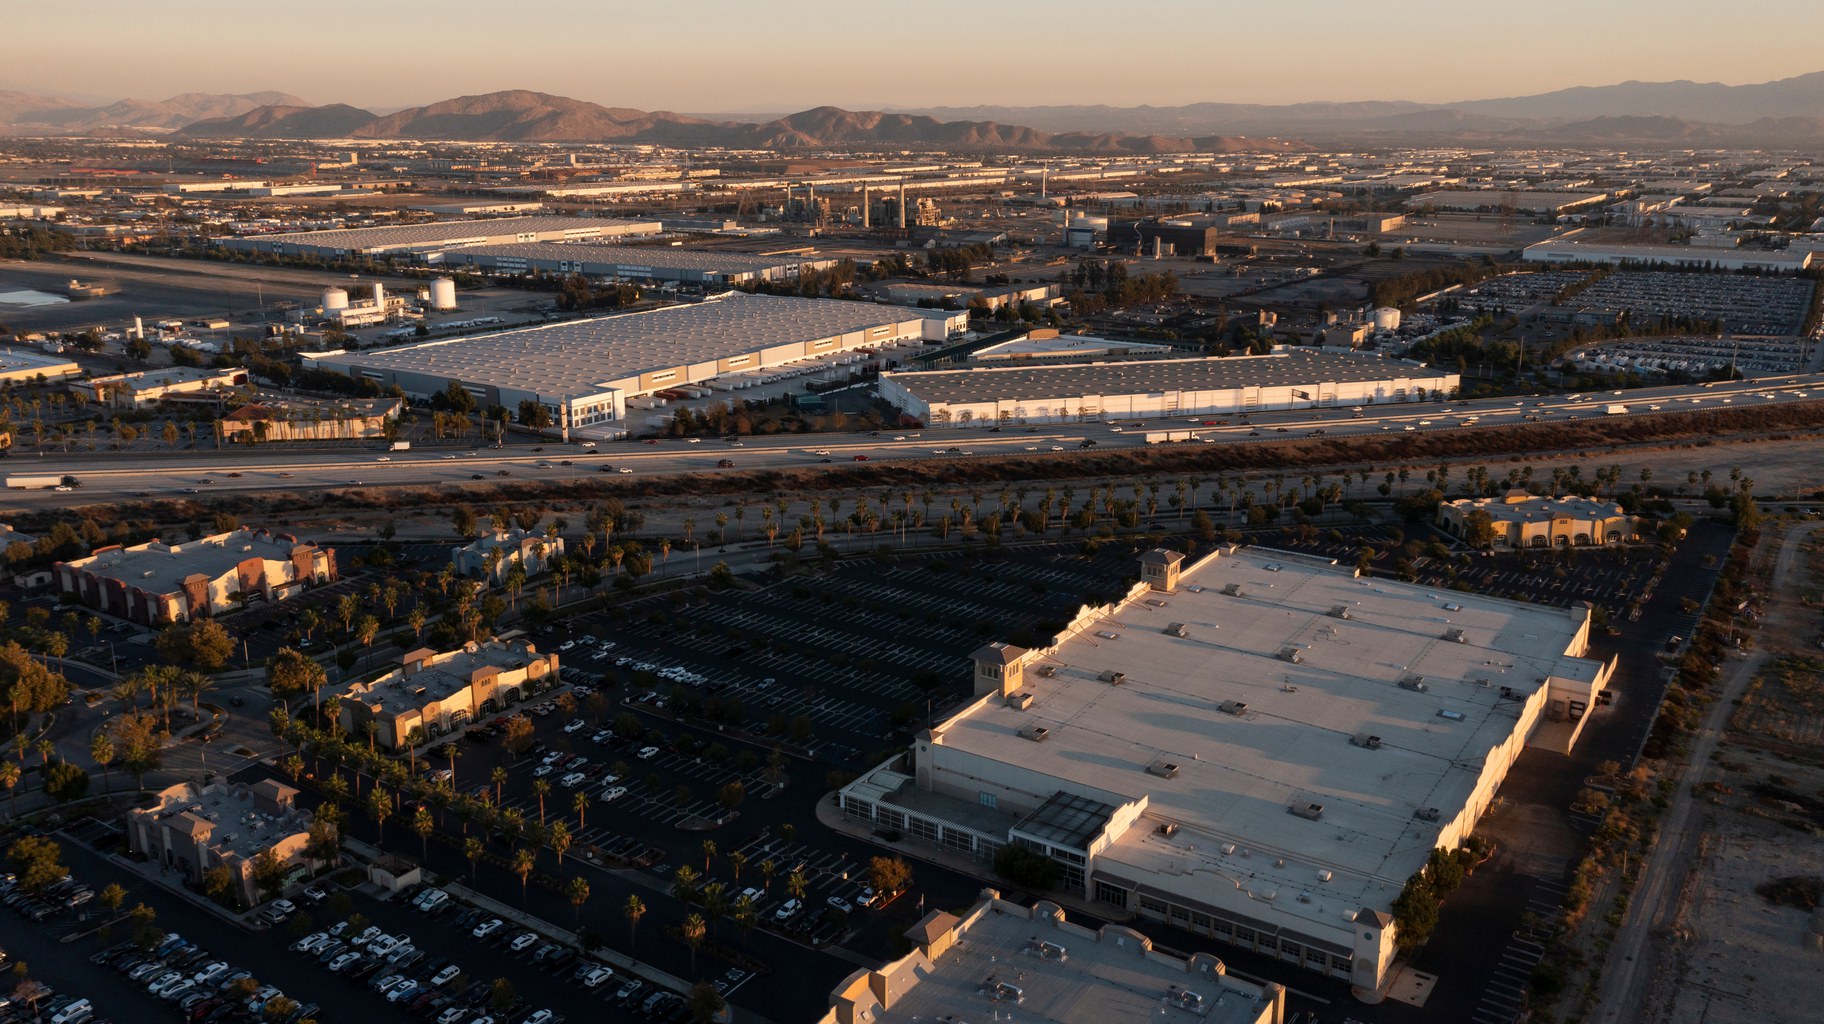 Inland Empire as warehouse hub Is the era ending? Greater LA